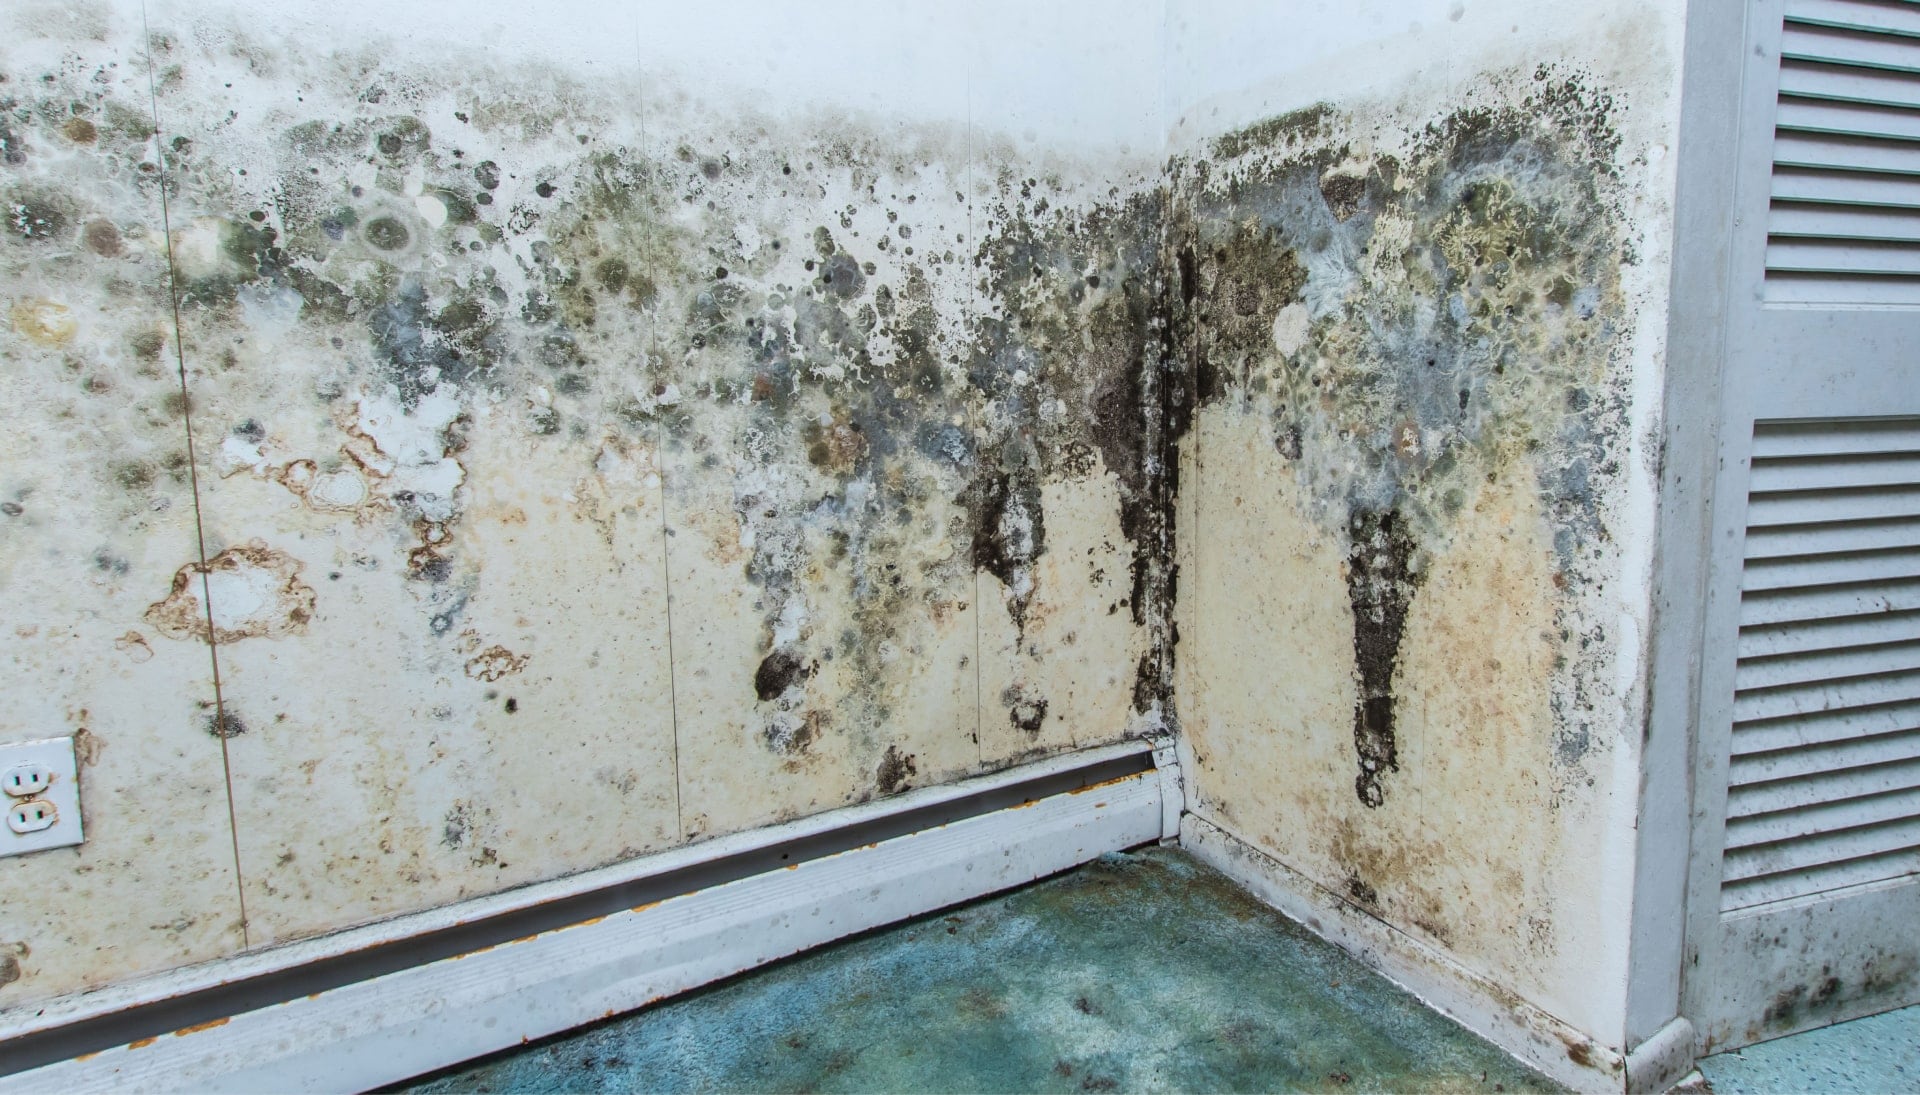 Professional mold removal, odor control, and water damage restoration service in Madison, Wisconsin.